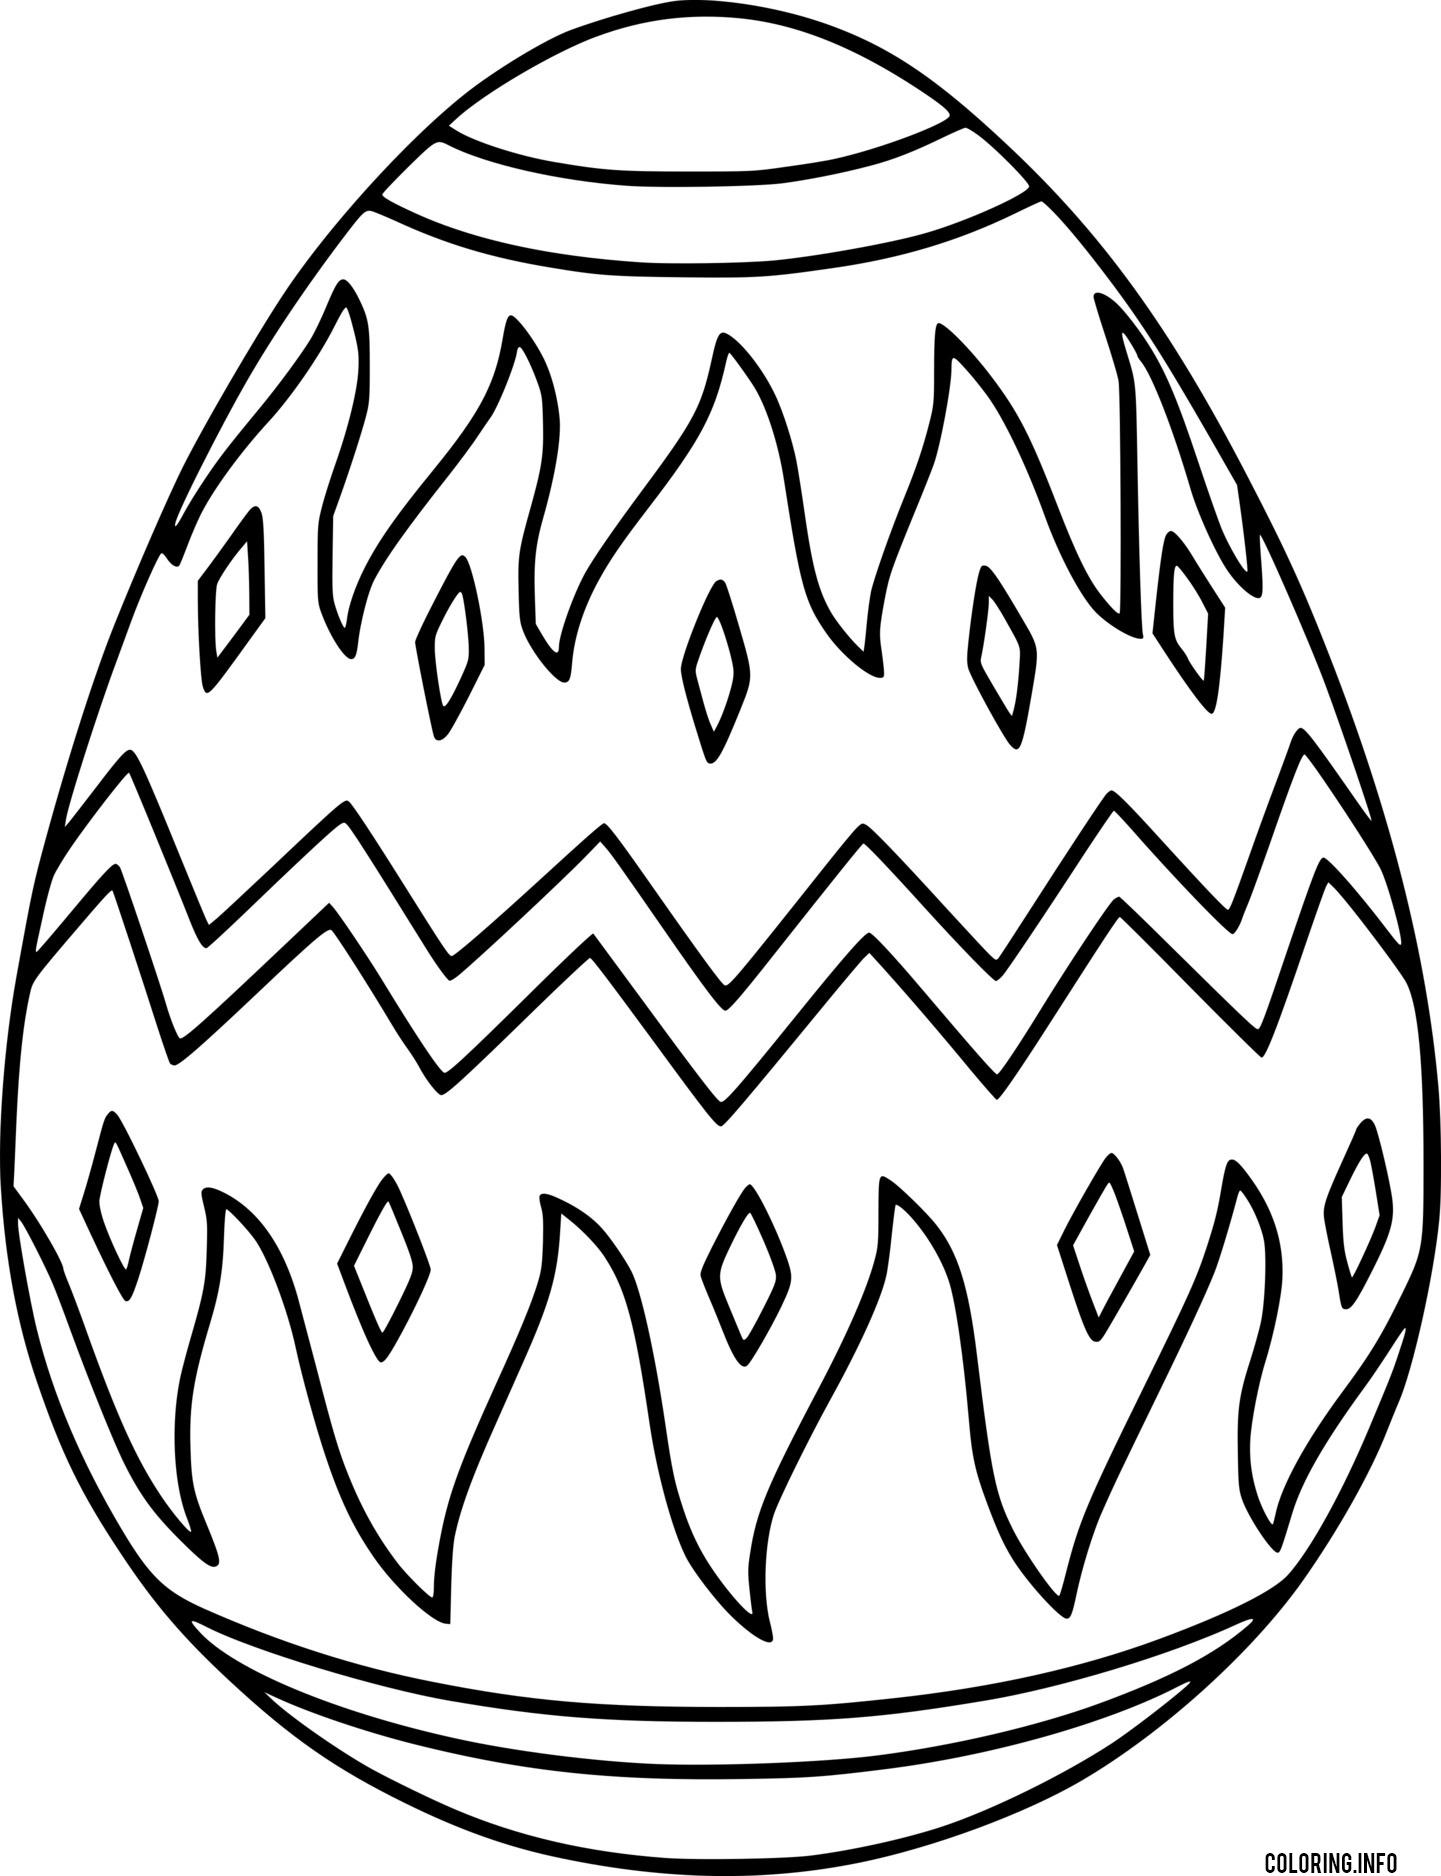 Easter Egg With Fire Patterns coloring